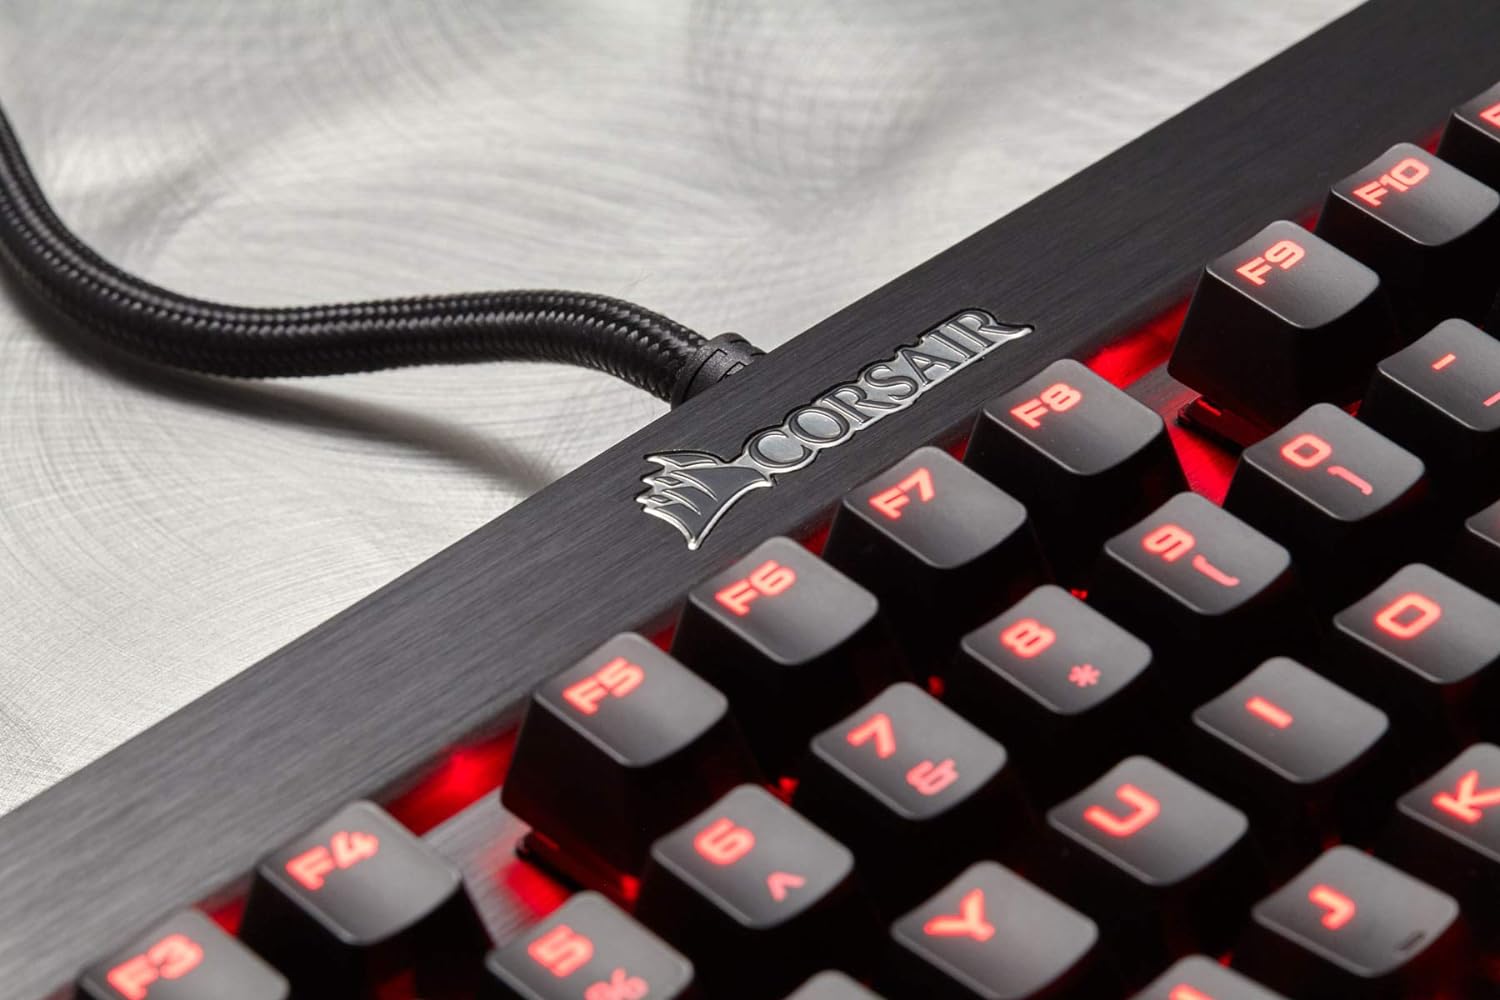 Corsair Mechanical Gaming Keyboard K70 Lux Cherry MX Blue - Responsive keys for precise gaming control. 0843591074124